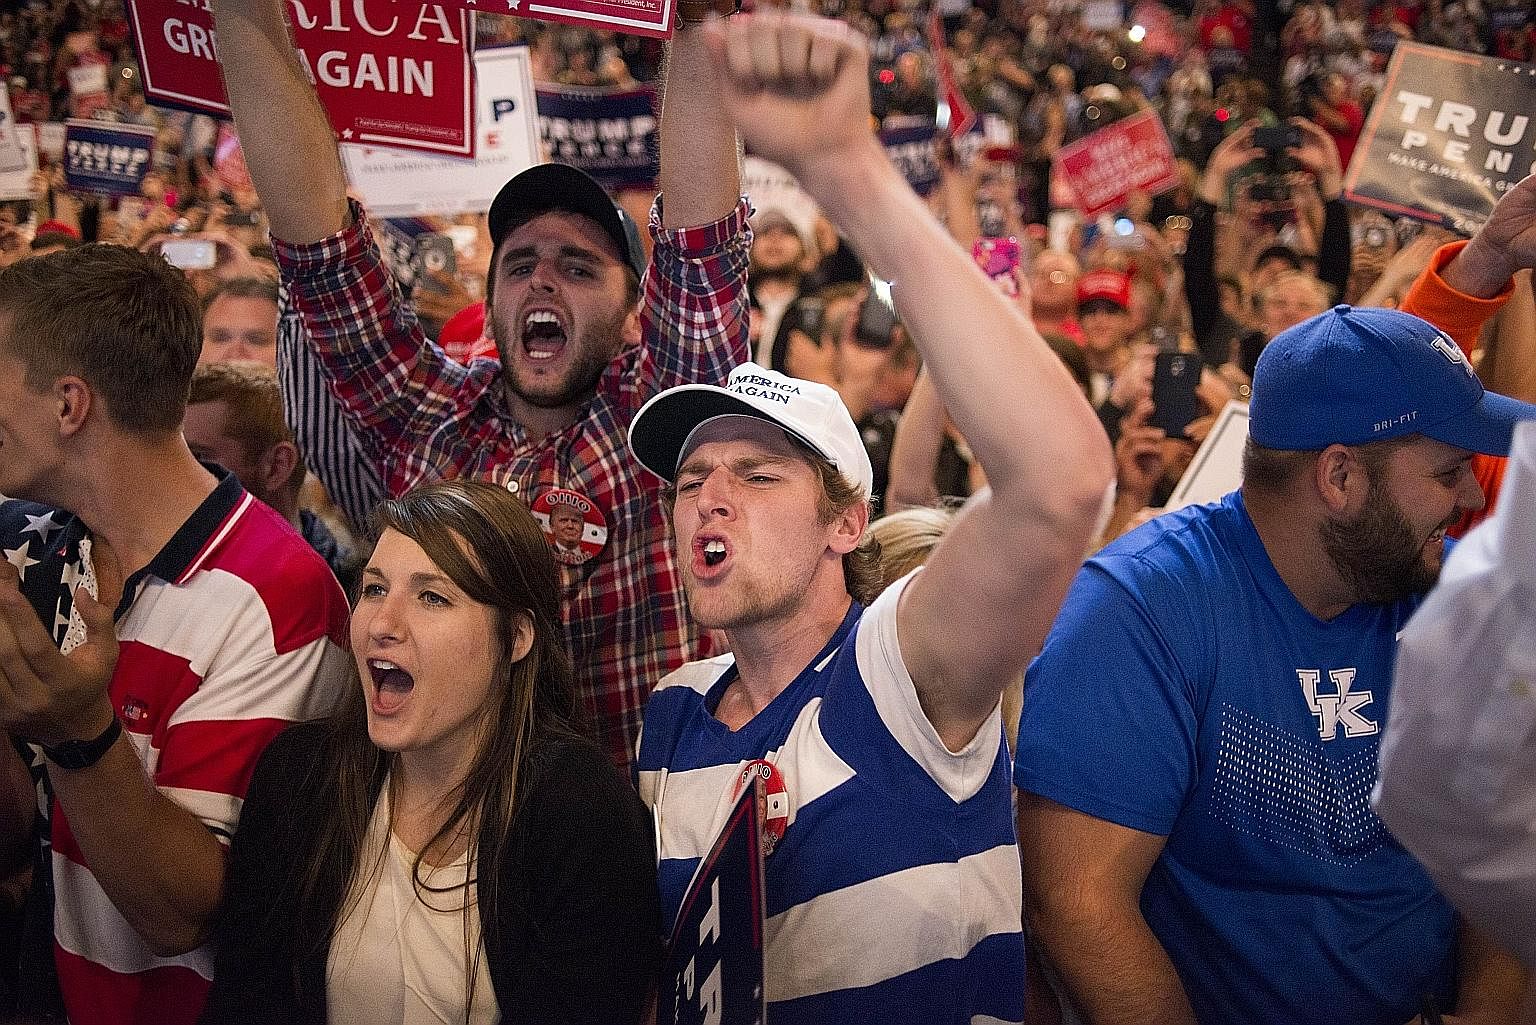 Supporters at a rally for Mr Trump on Oct 13 in Cincinnati, Ohio. The rhetoric in the campaigning has been unusually corrosive, unearthing old social, racial and geographic fault lines, and leaving many Americans and outsiders wondering at the future